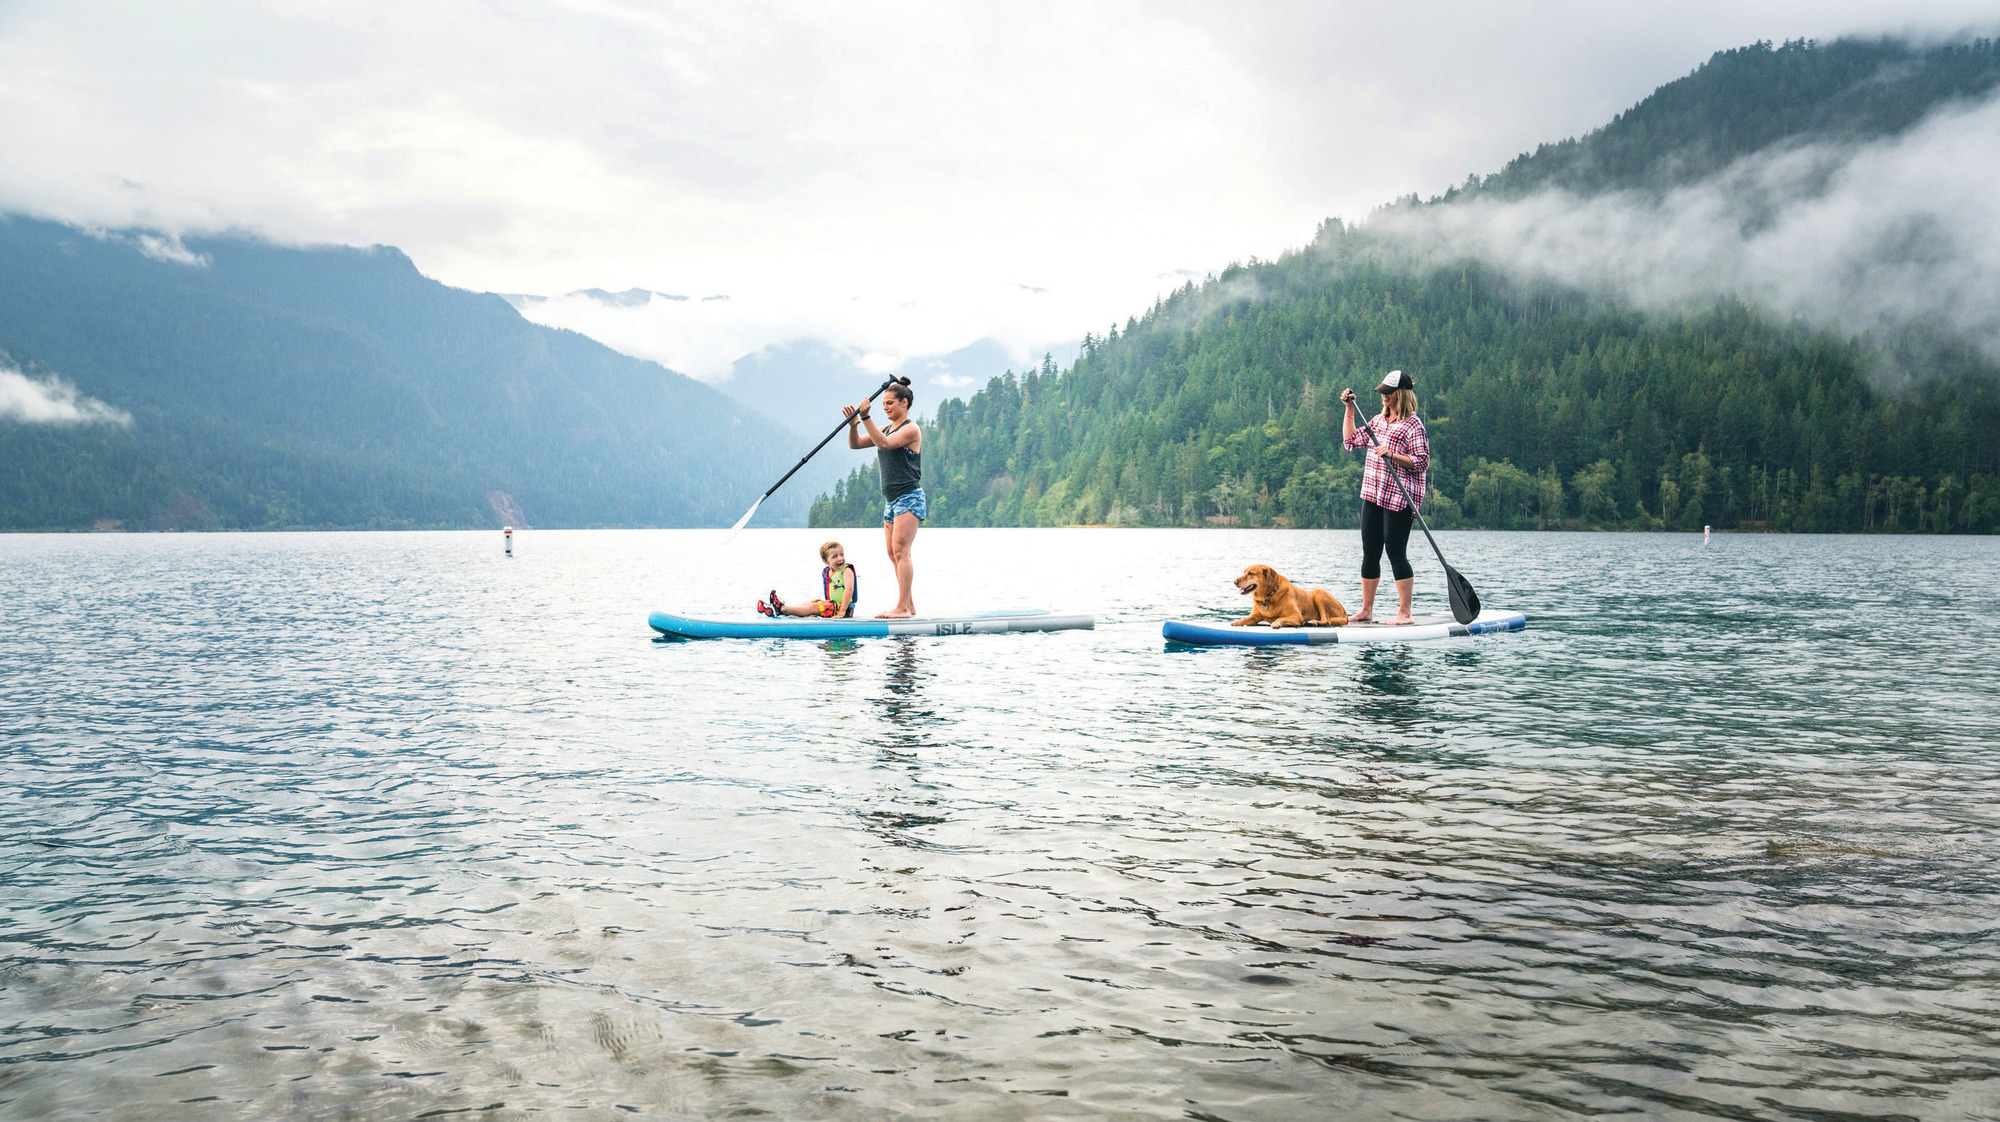 The placid Lake Crescent is ideal for kayaking or SUPing.